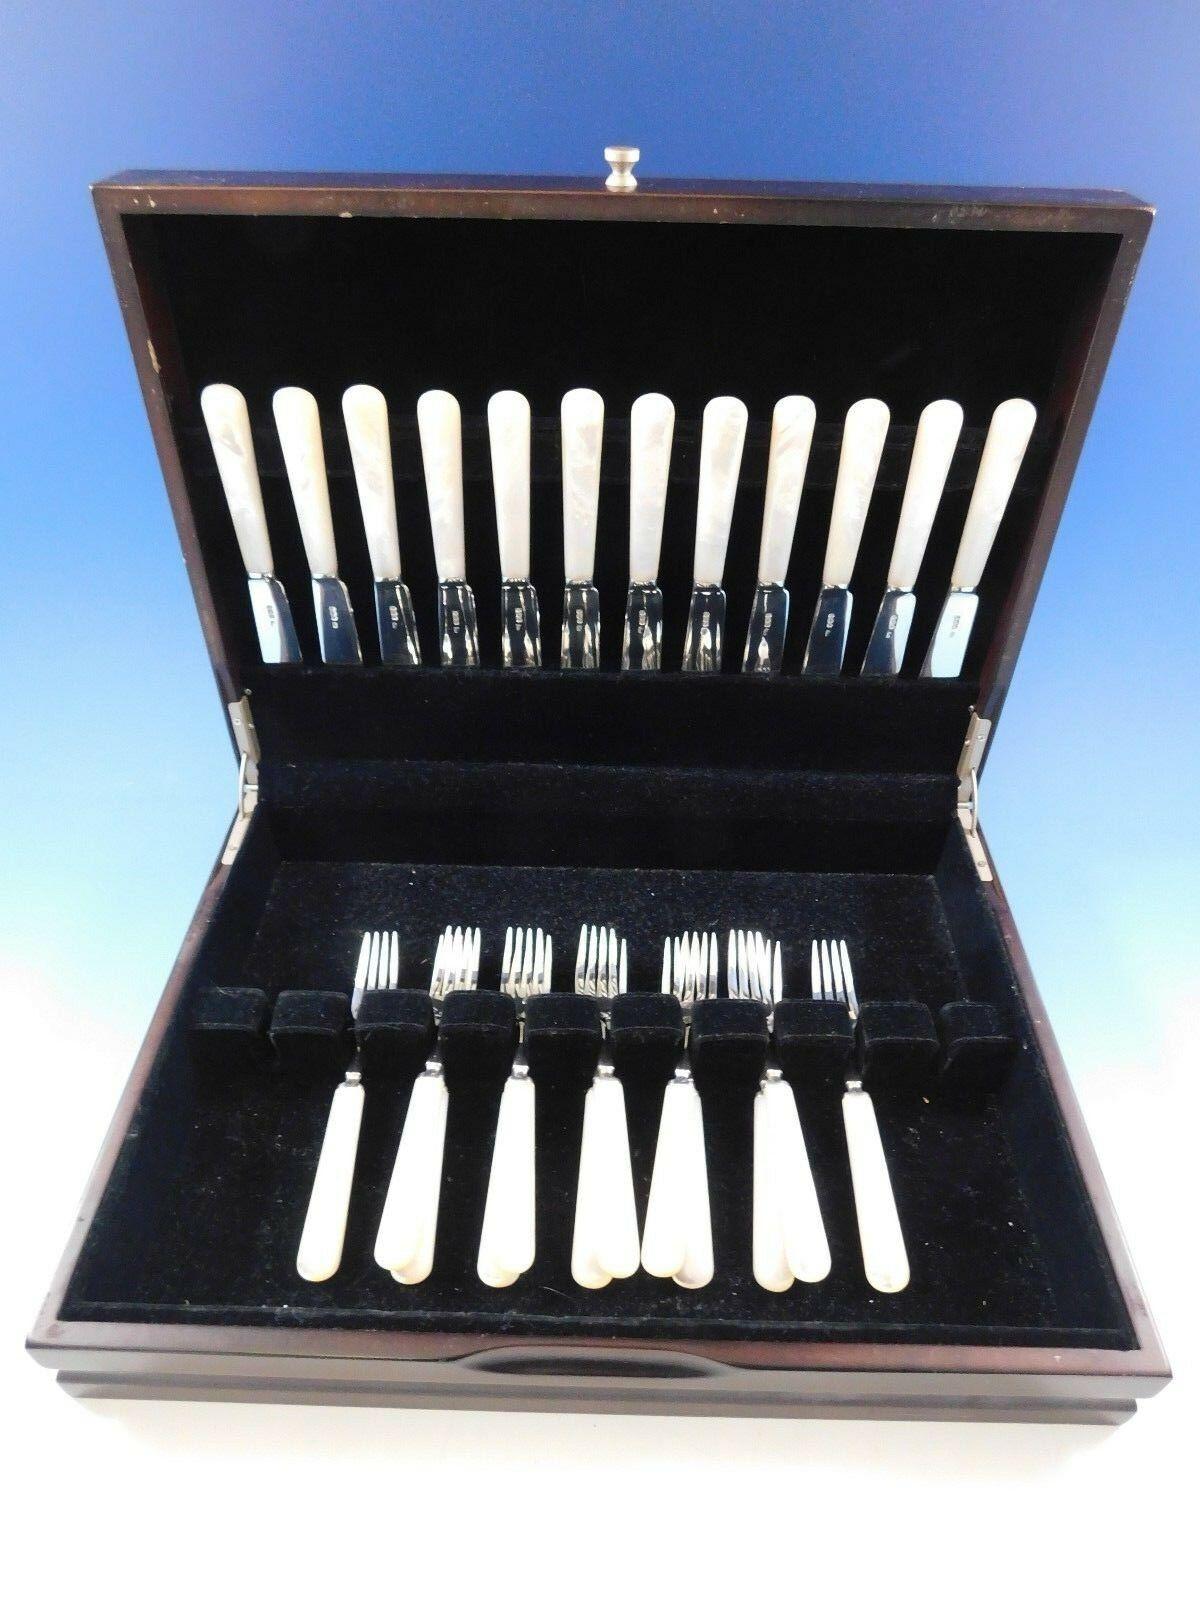 Stunning mother of pearl fish set by Frank Cobb and Co. Ltd English sterling silver fish set, 24 pieces. These pieces feature a mother of pearl handle and sterling silver blades and tines. This set includes:

12 fish knives, 7 3/8